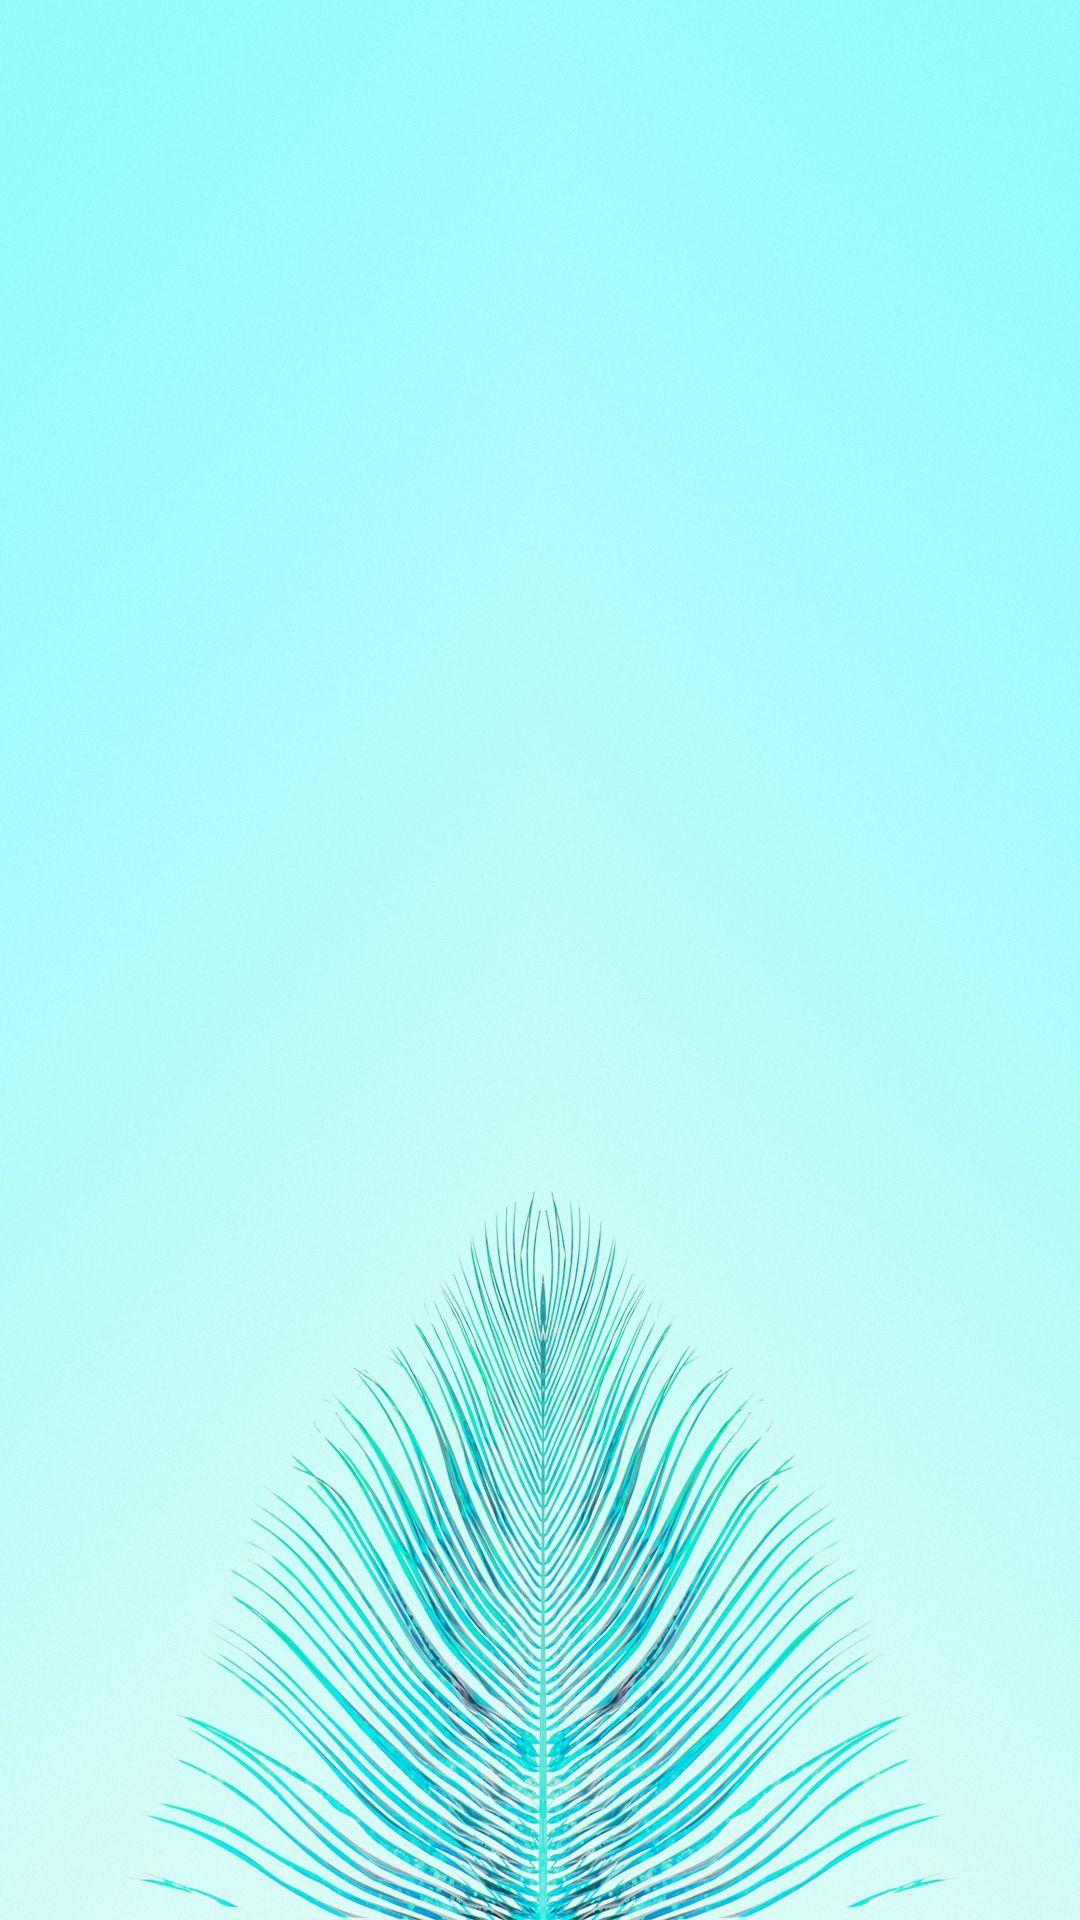 Turquoise Iphone Wallpapers Top Free Turquoise Iphone Backgrounds Wallpaperaccess